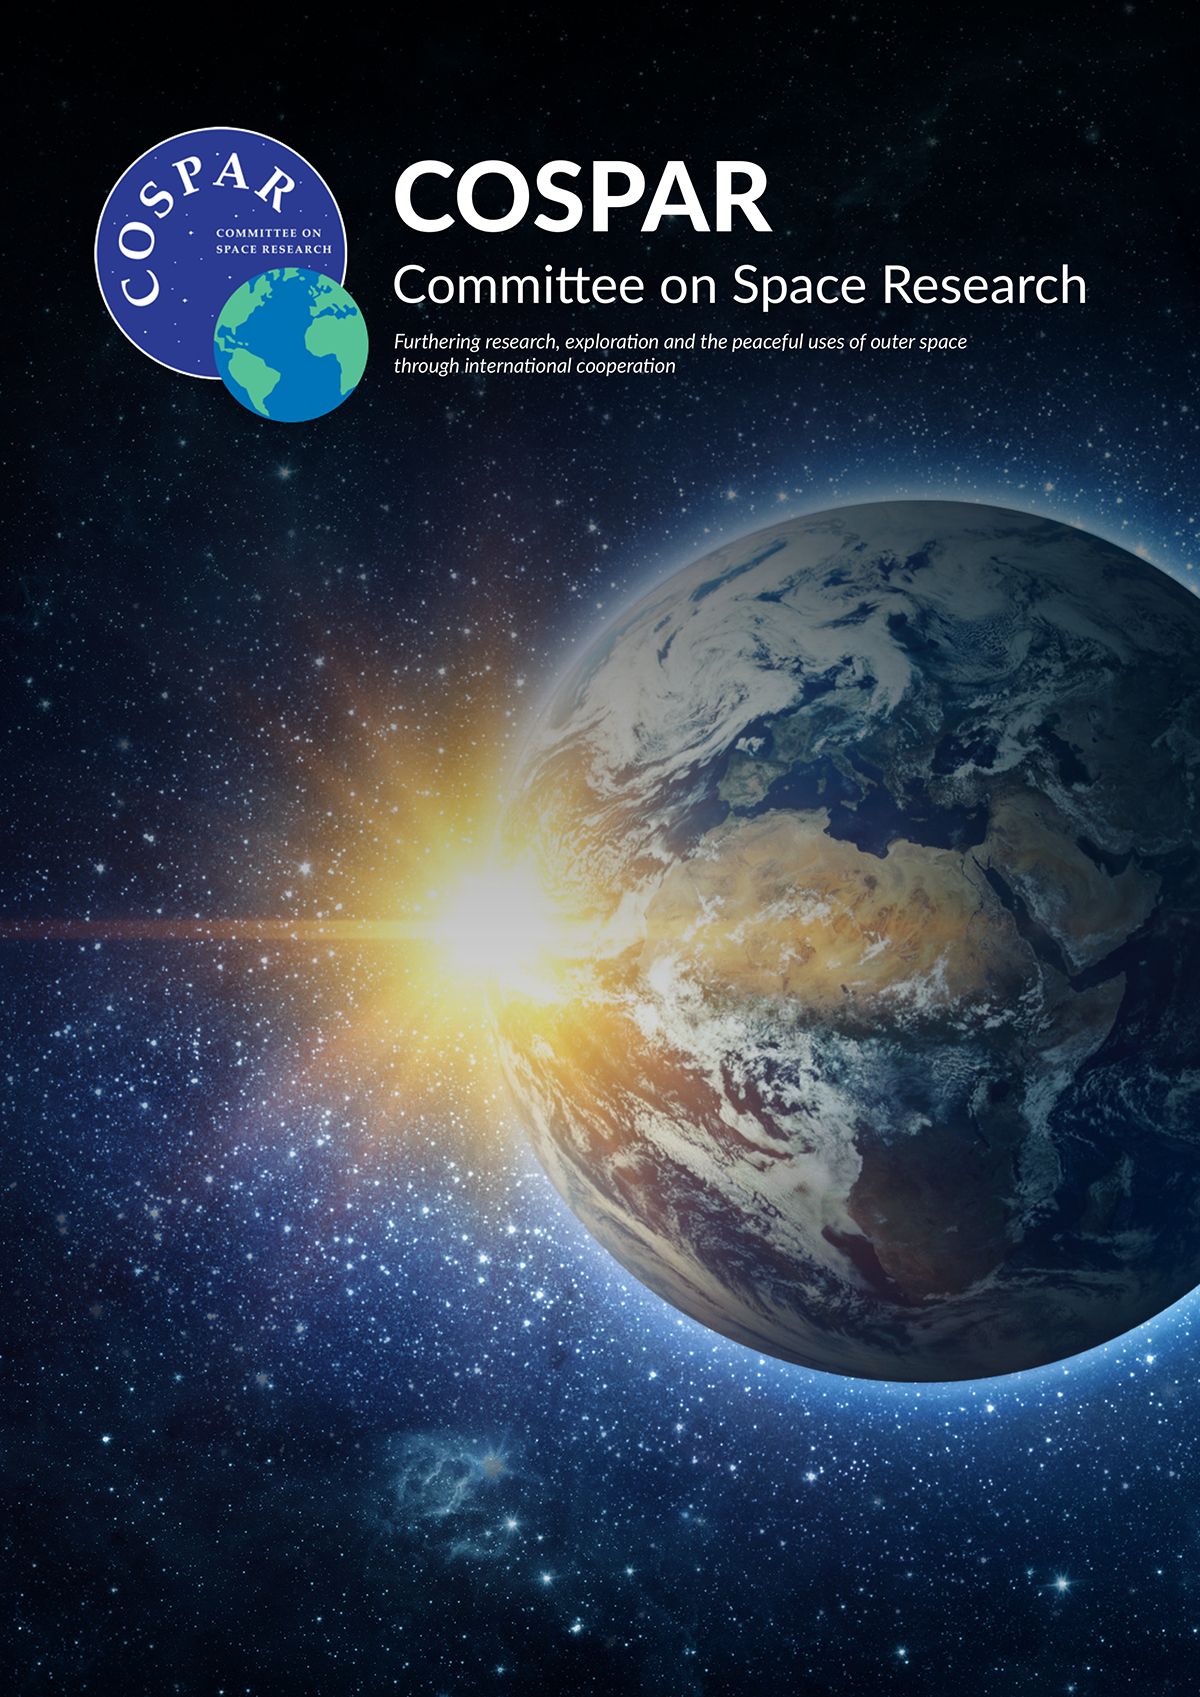 COSPAR - Committee on Space Research